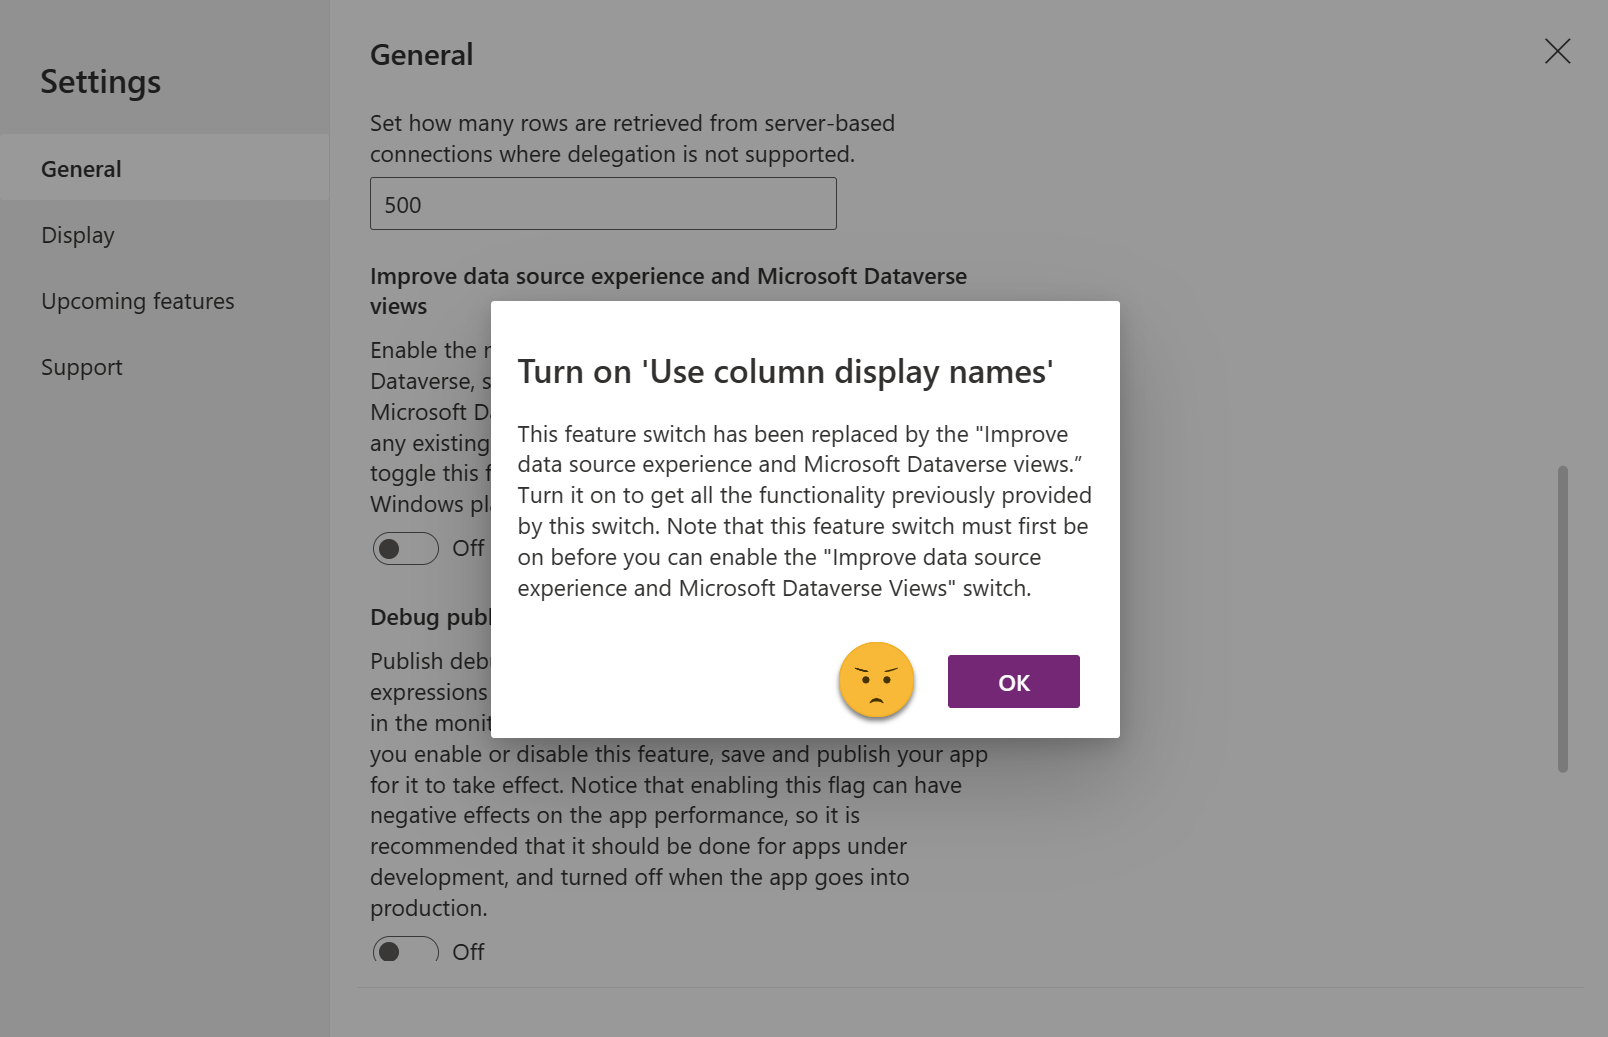 image displays a message that we need to turn on 'Use column display names' before we can enable the 'Improved data source experience and Microsoft Dataverse views' feature flag